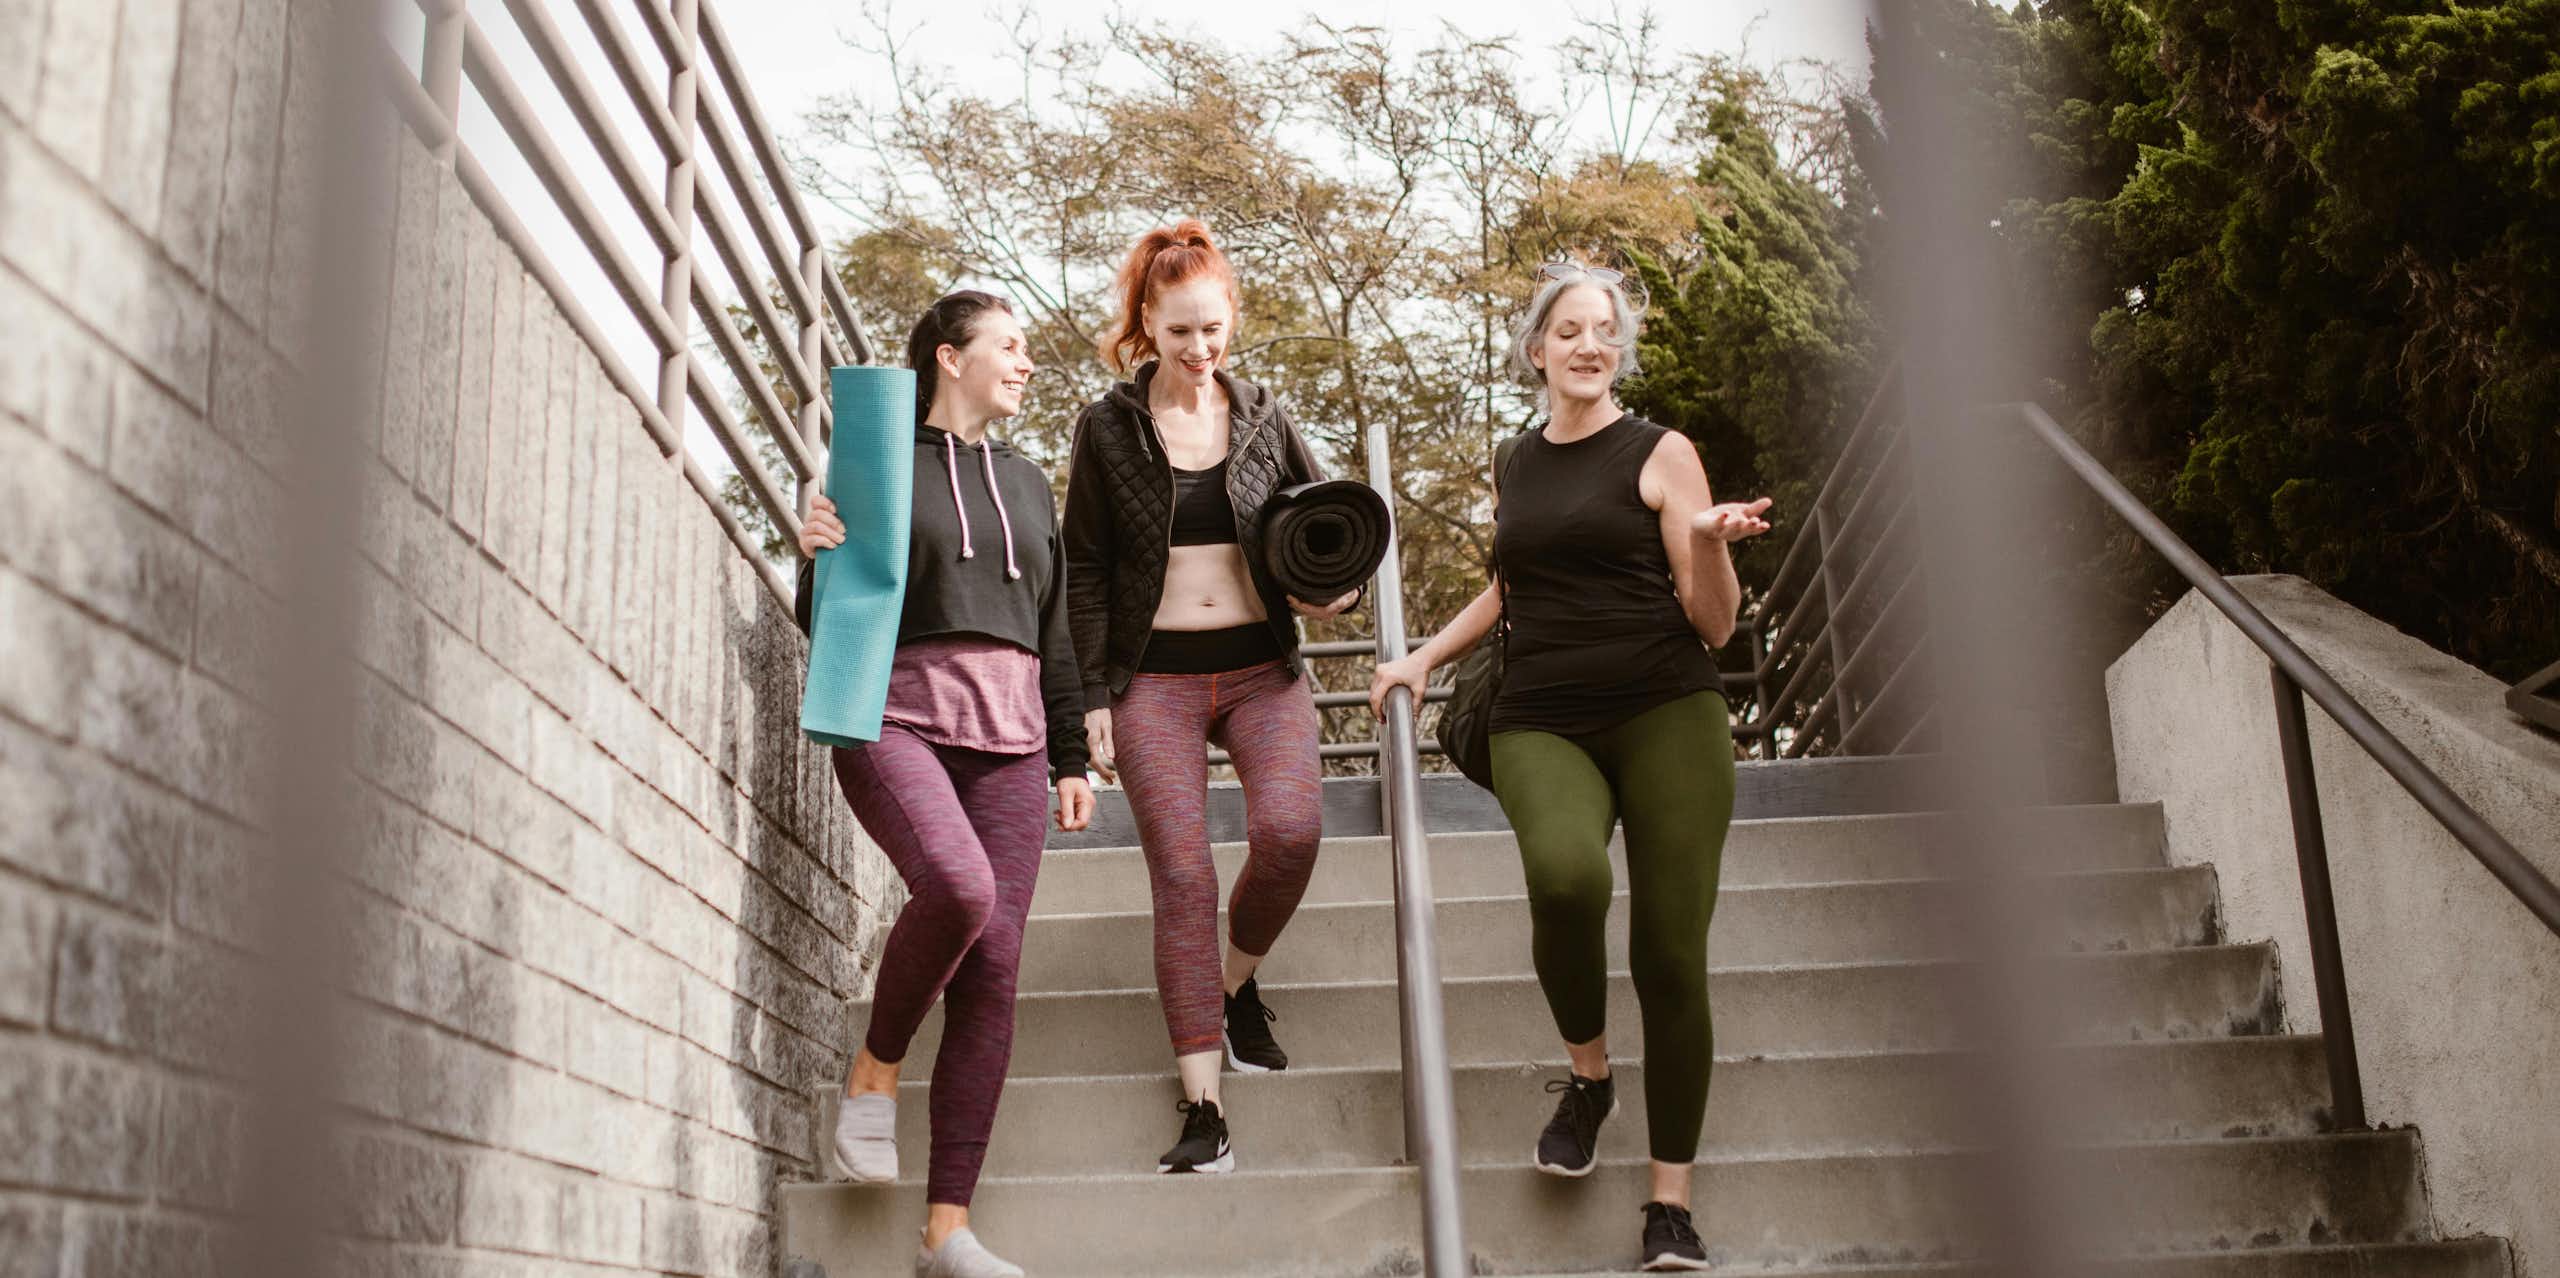 three women walk down steps carrying yoga mats, dressed for exercise